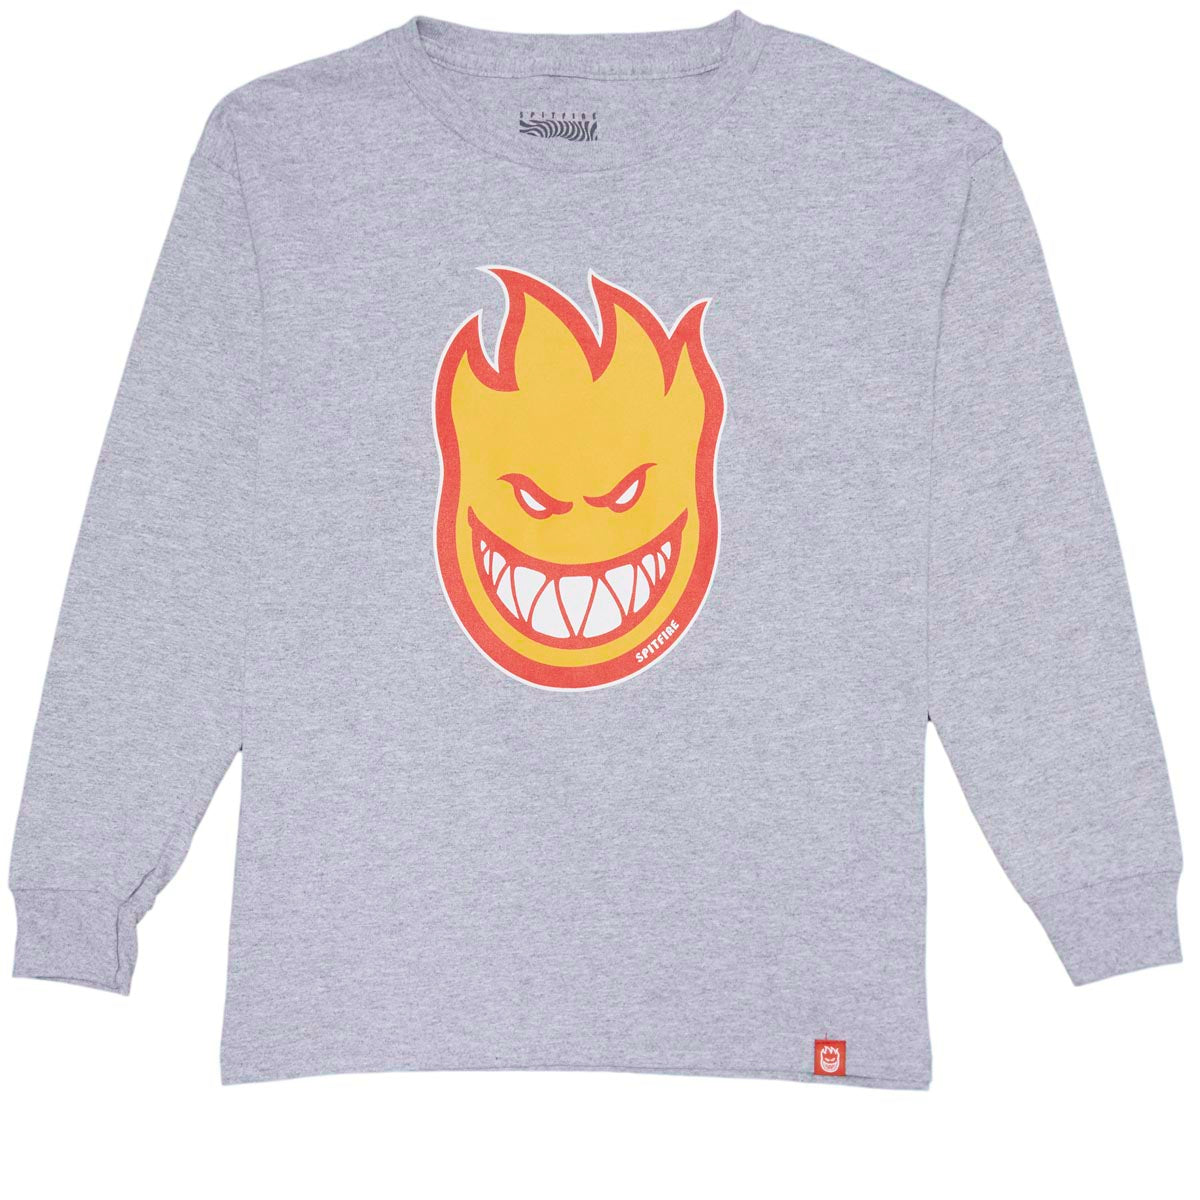 Spitfire Youth Bighead Fill Long Sleeve T-Shirt - Sport Grey/Gold/Red image 1